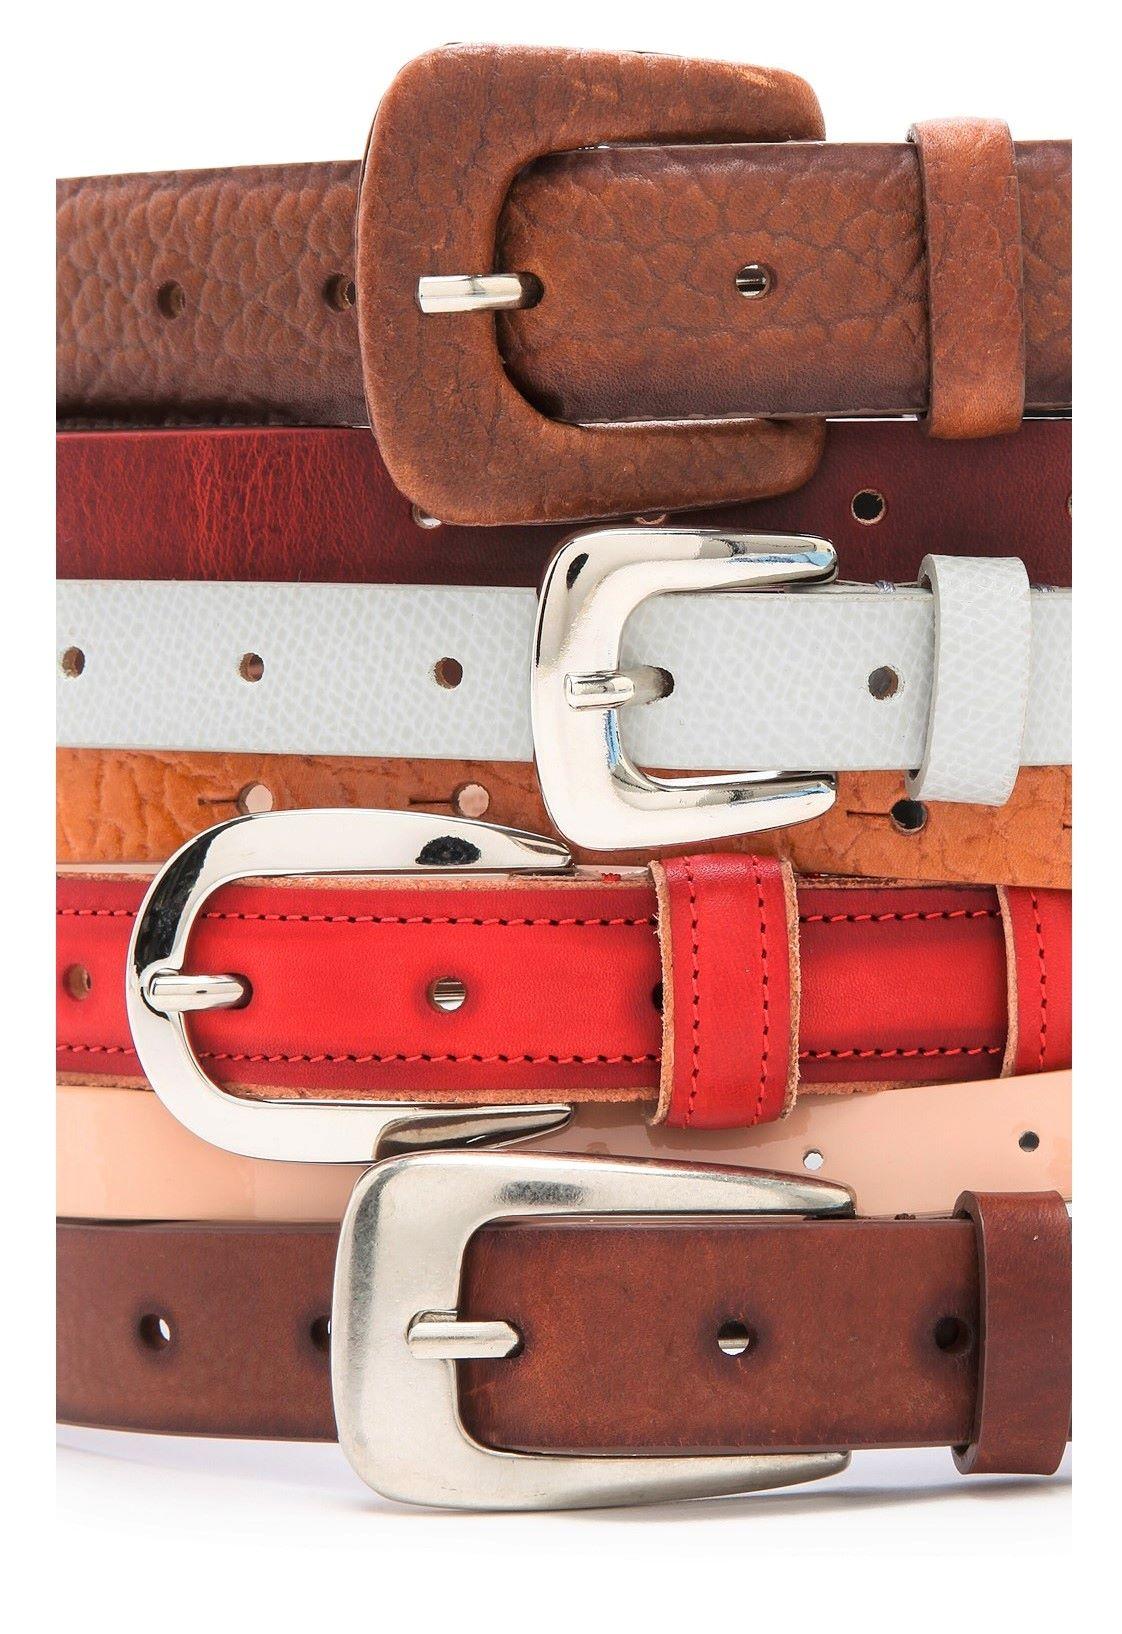 An incredible leather belt from Martin Margiela. It is comprised of 7 leather belts stacked one above another in different colors, widths and textures each with it's own functional, adjustable buckle and loops all combine to form one stunning wide